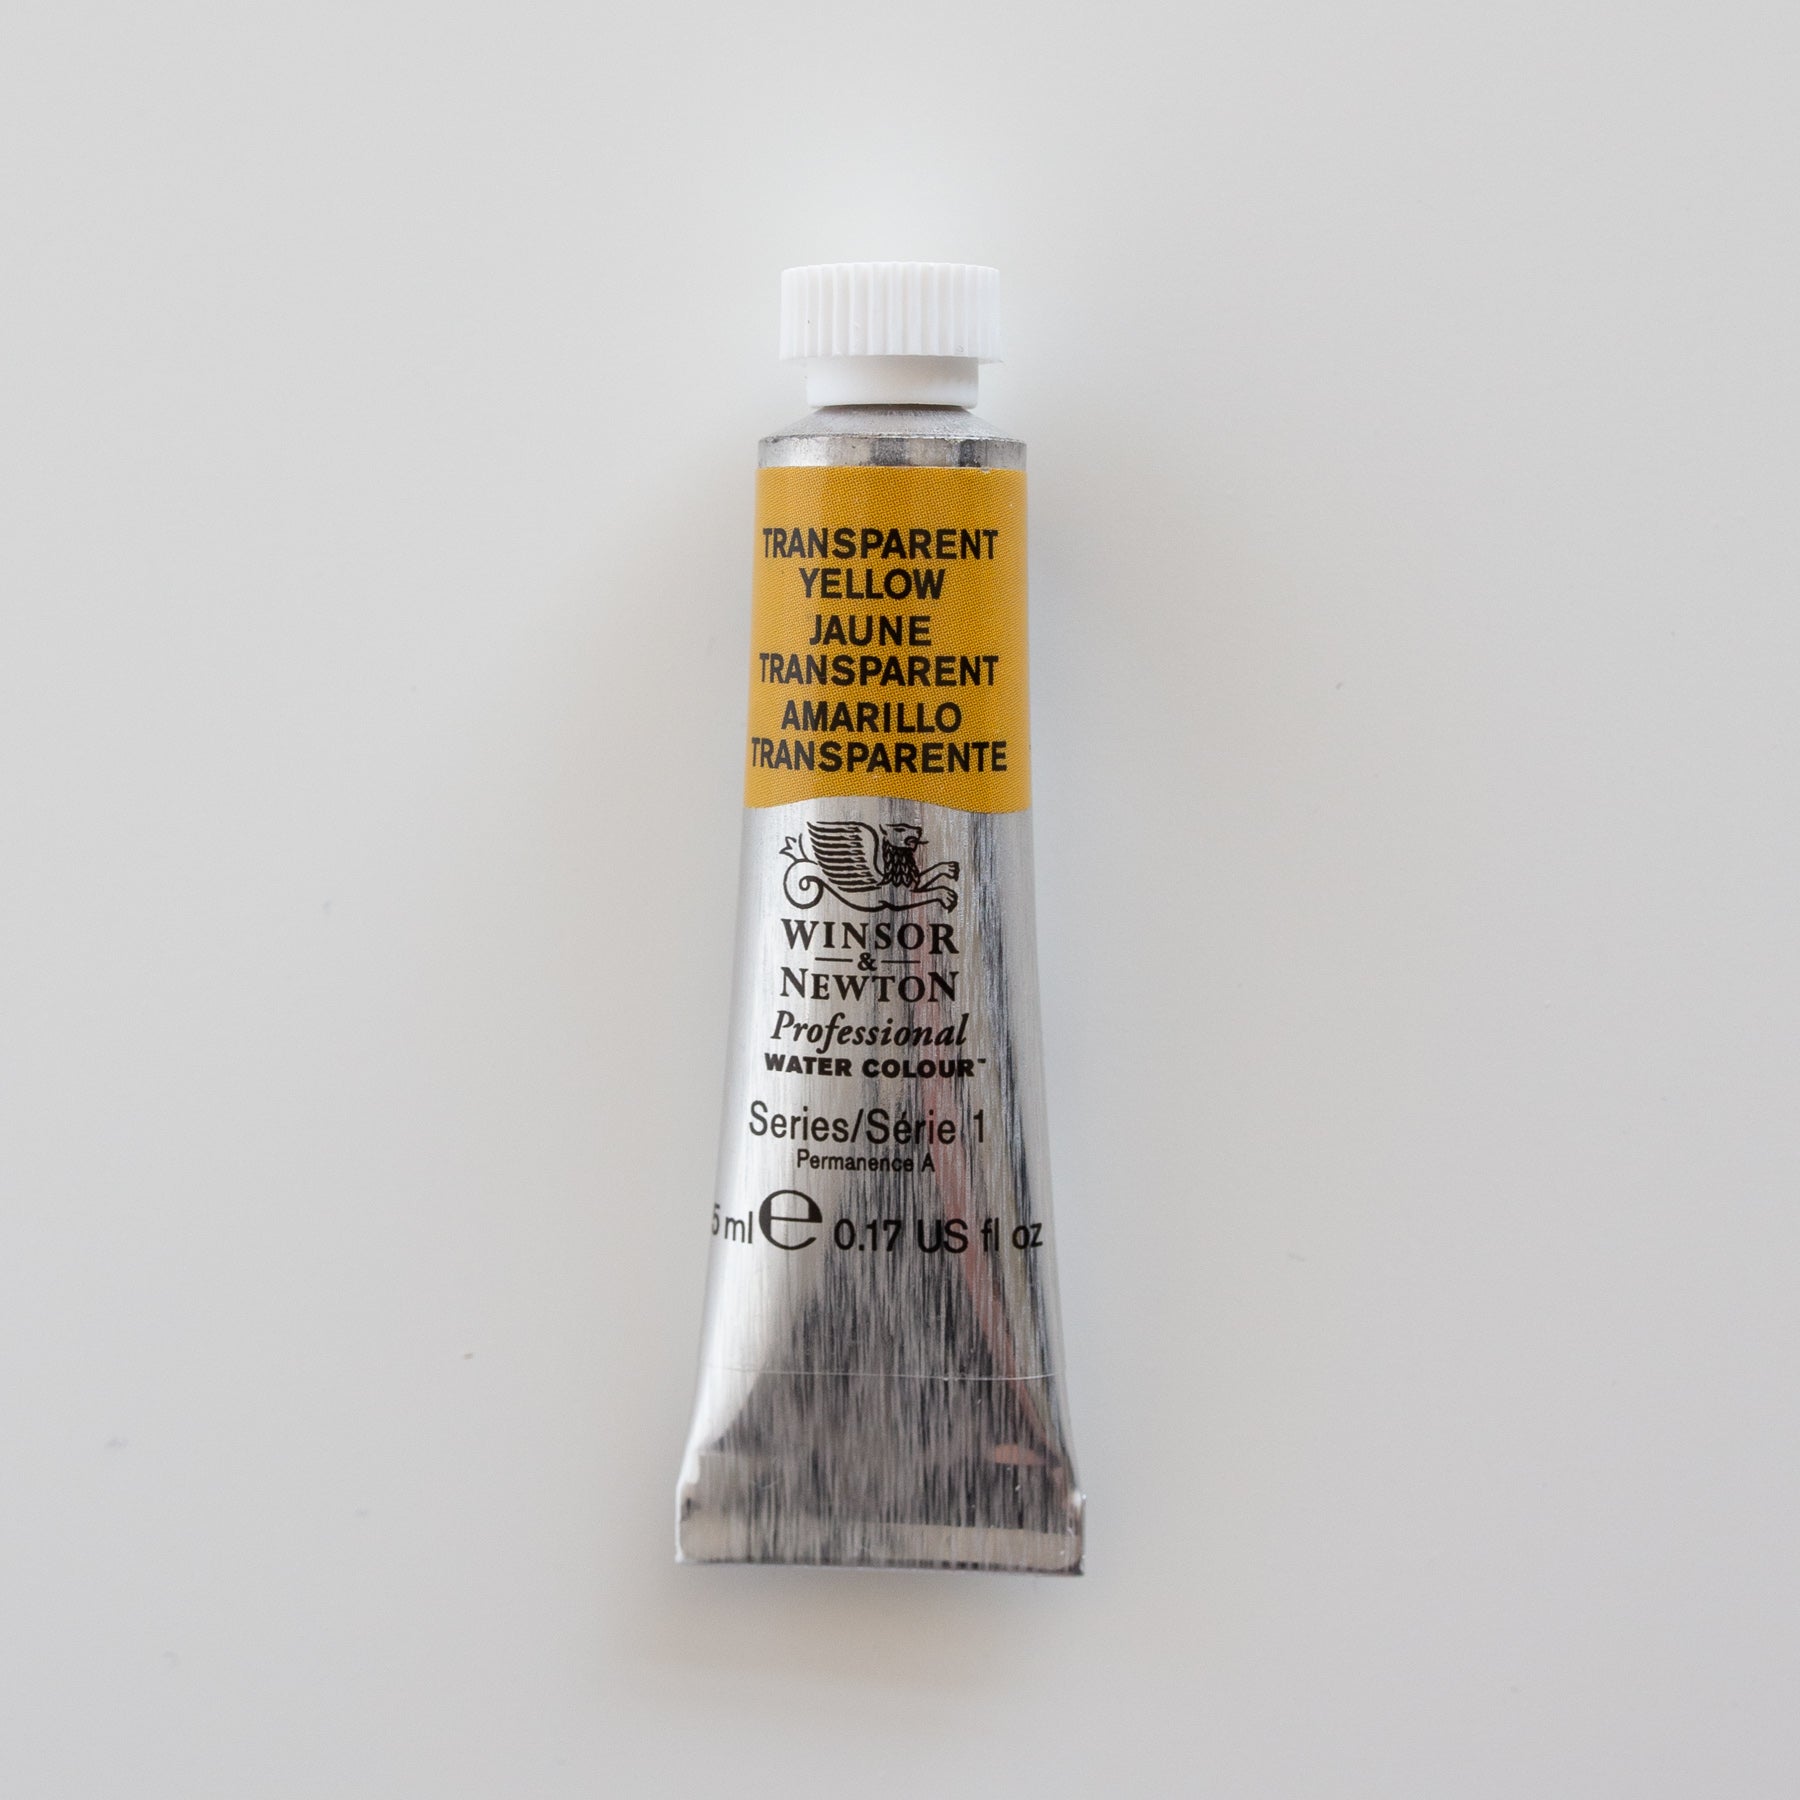 Winsor & Newton Professional Water Colours 5ml Transparant Yellow 1